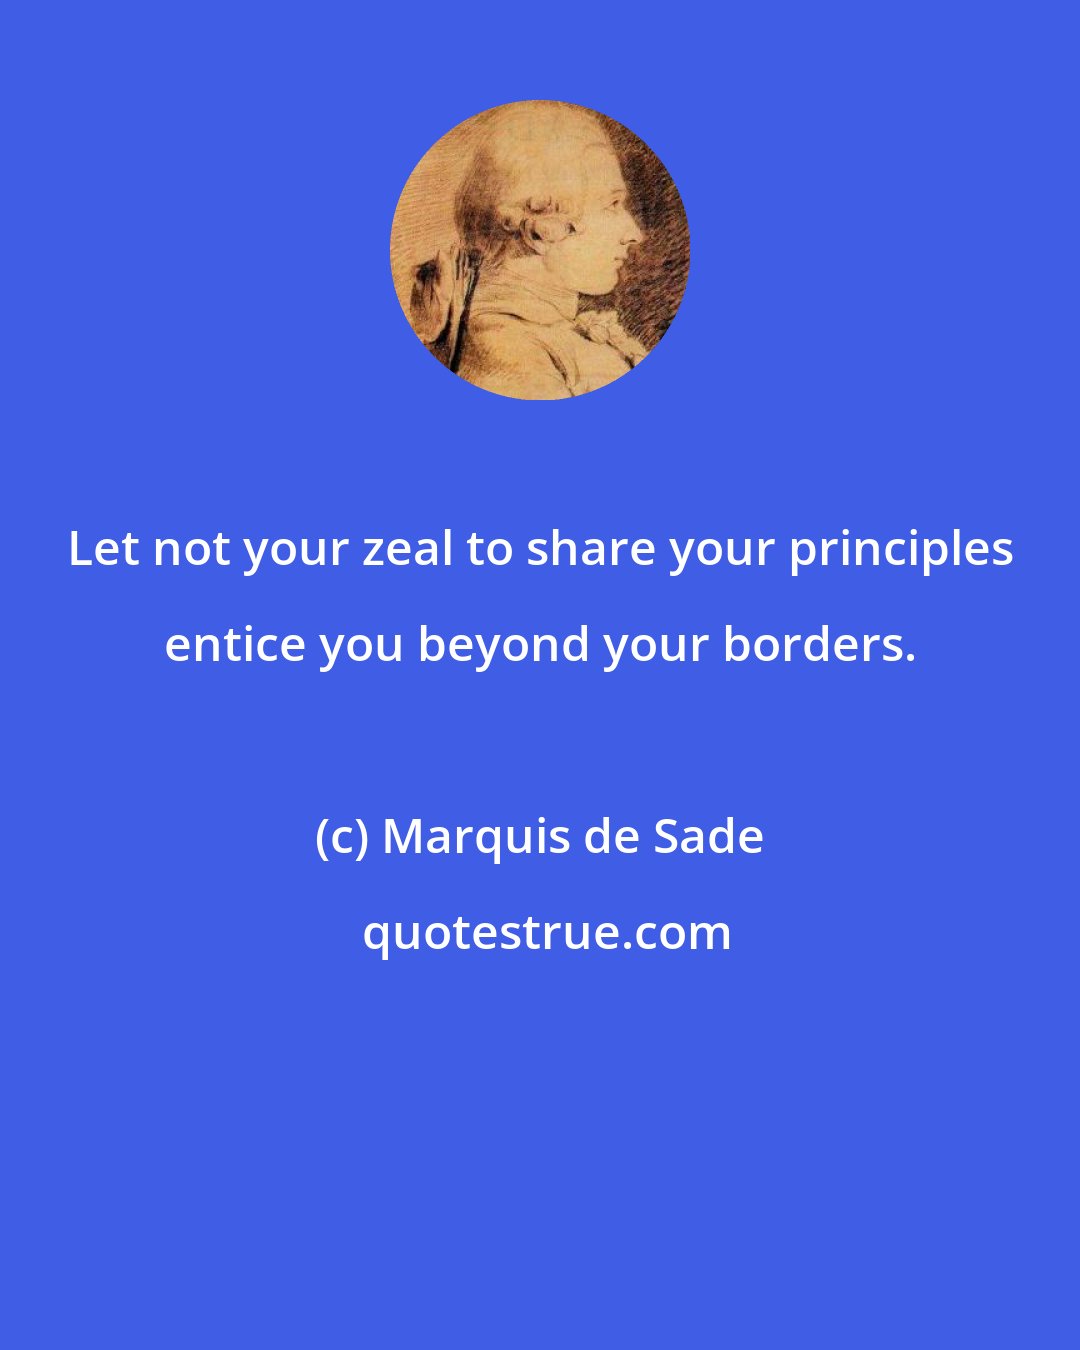 Marquis de Sade: Let not your zeal to share your principles entice you beyond your borders.